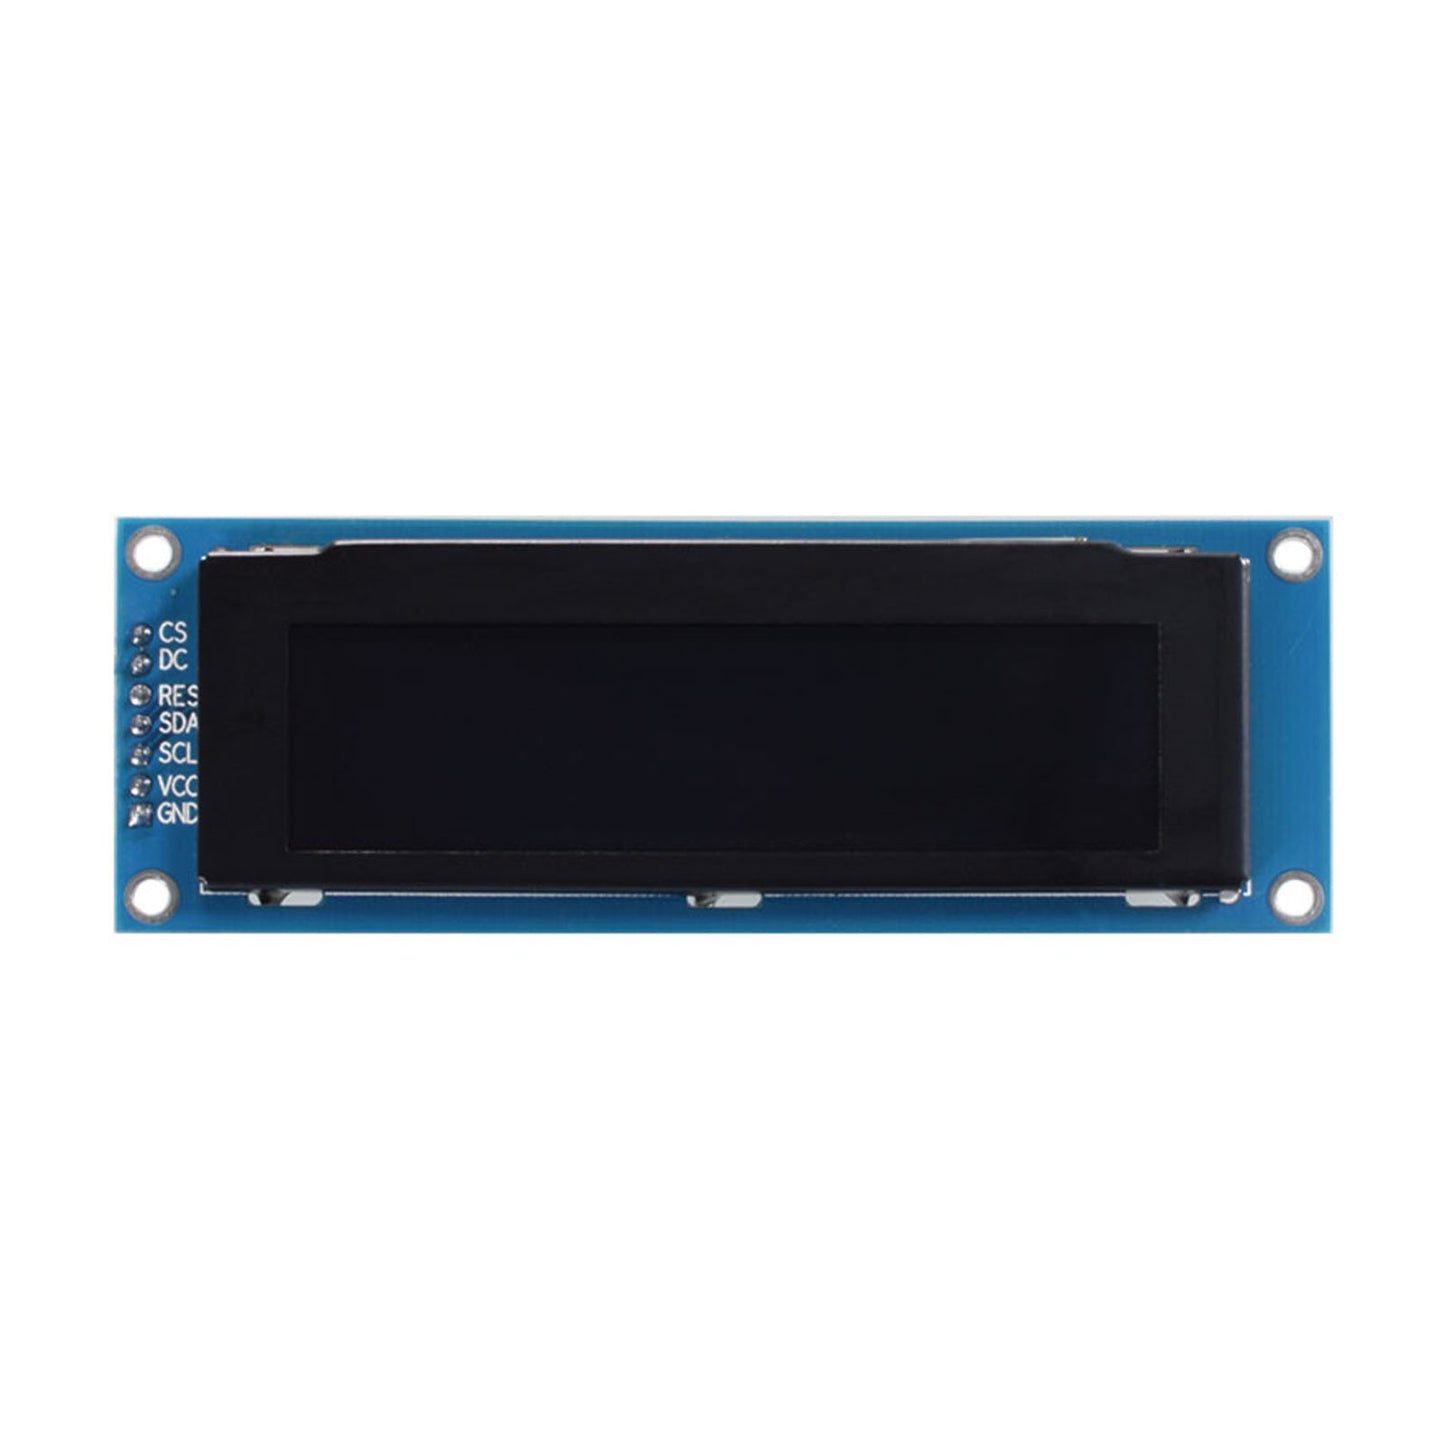 2.8 inch Monochrome OLED Graphic Display Module with 256x64 resolution, utilizing SPI interface